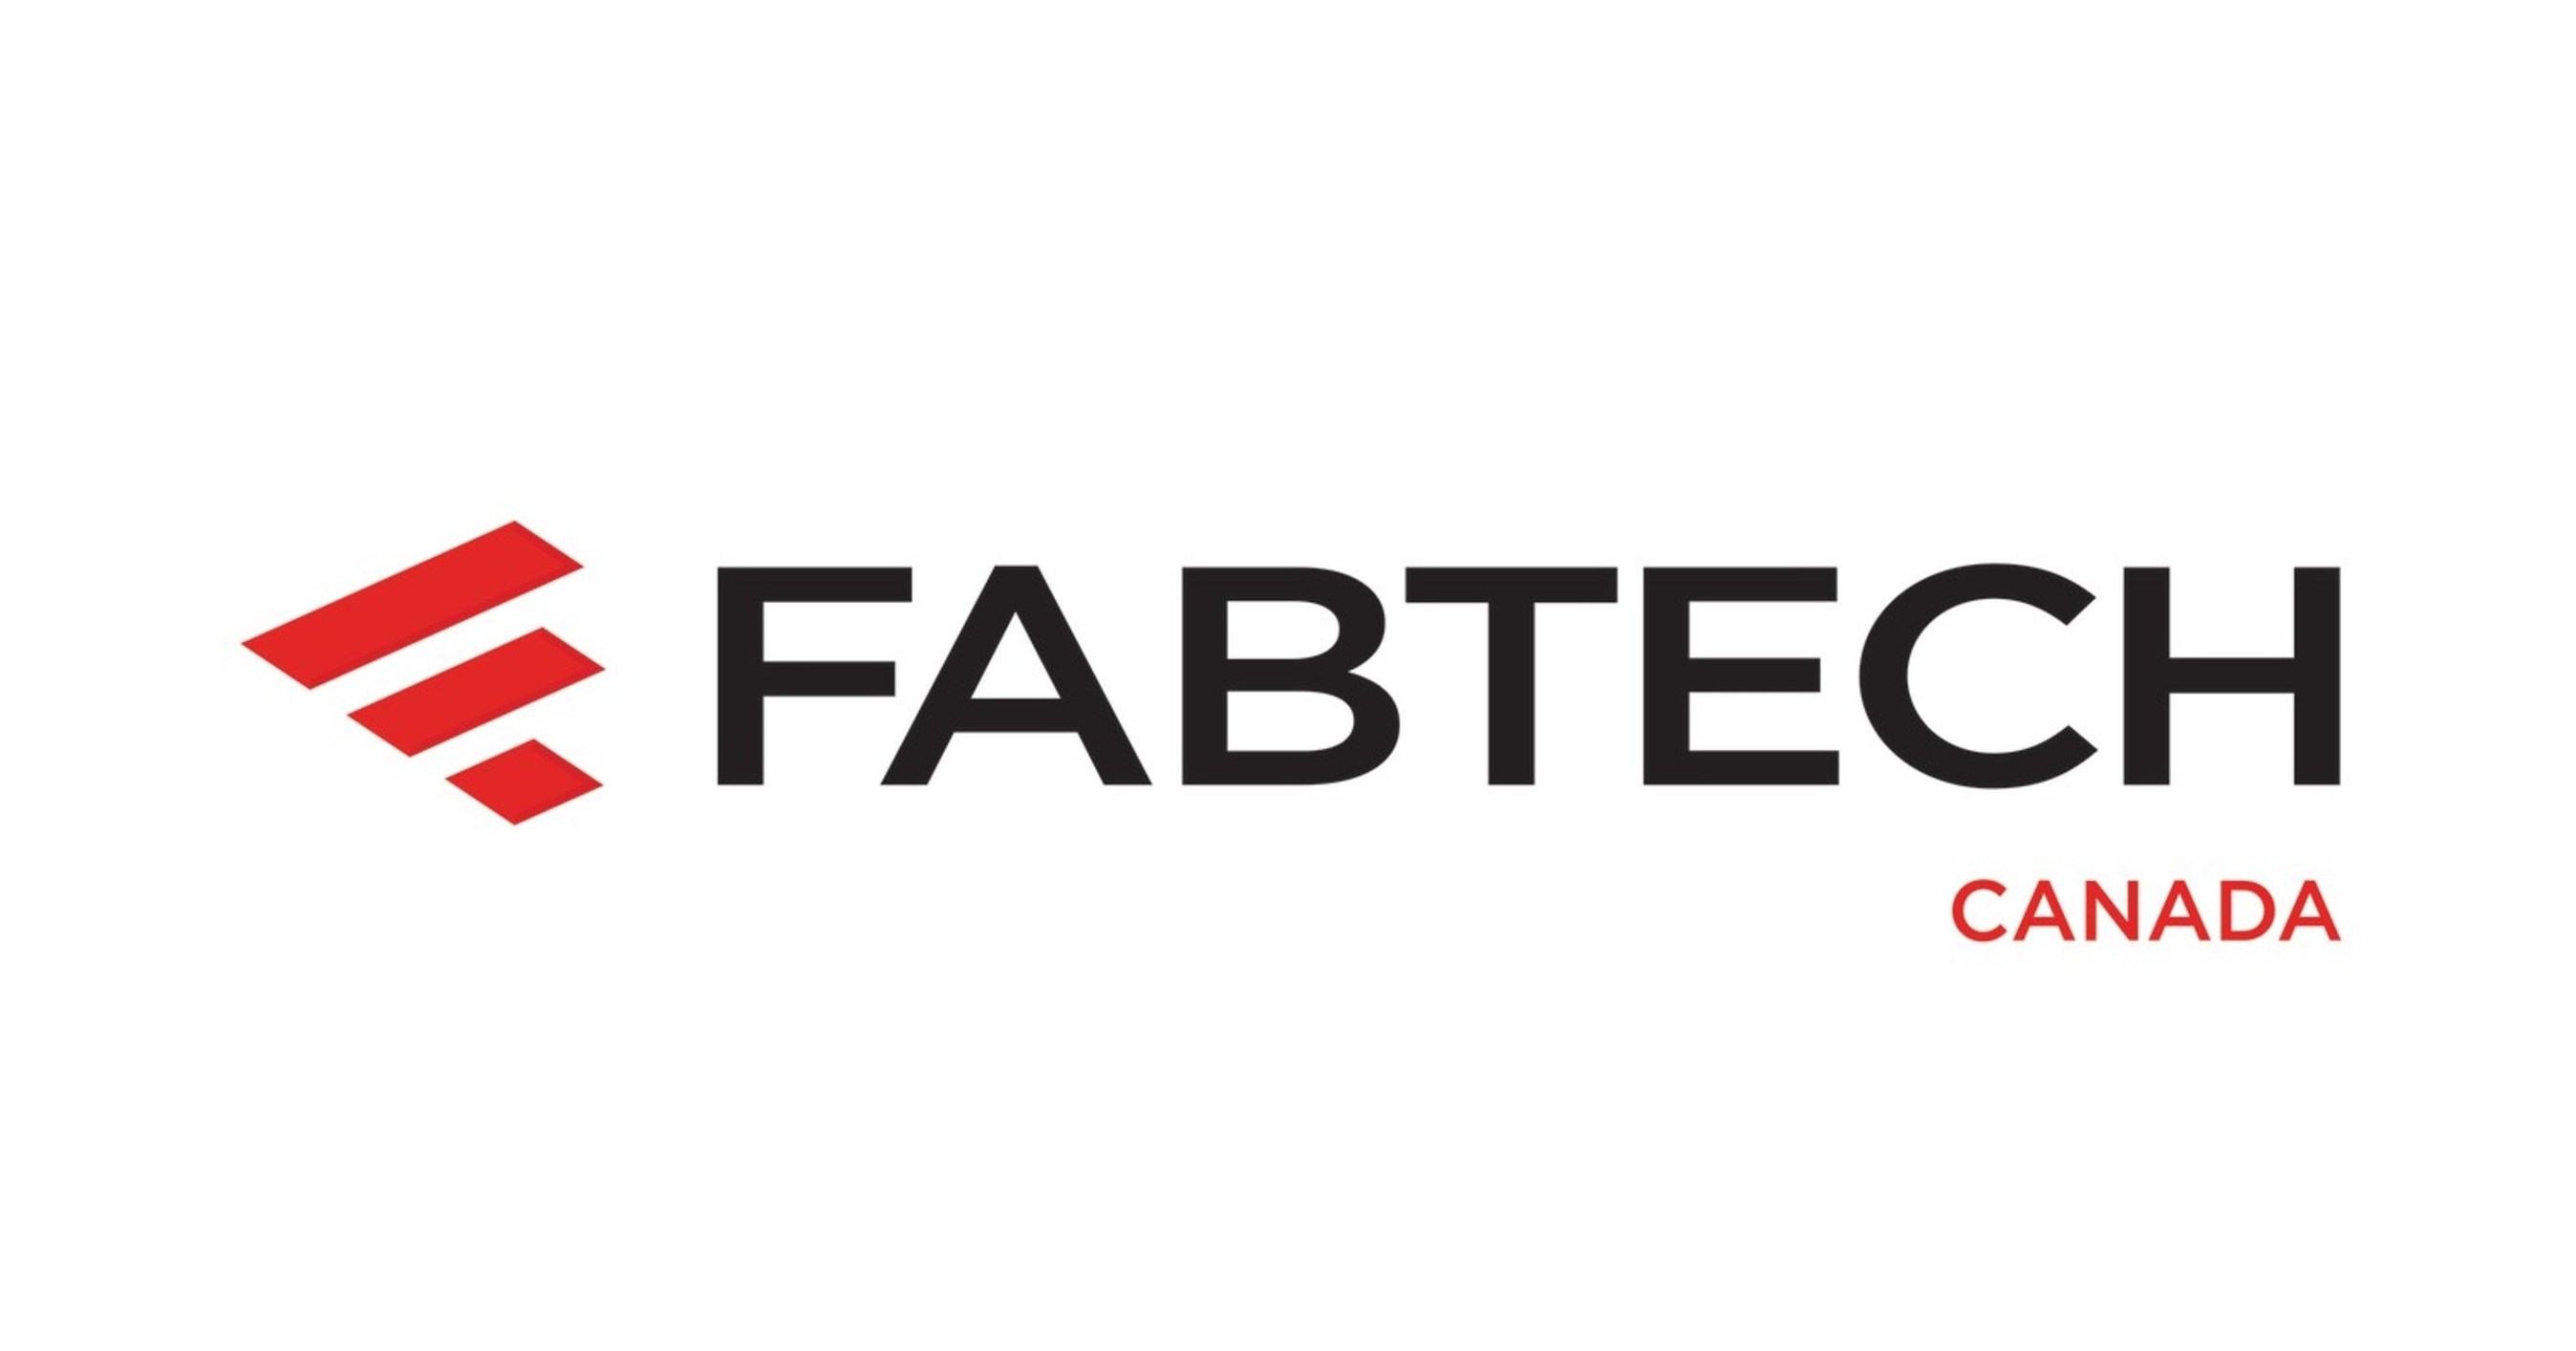 FABTECH Canada 2018 The Future of Canadian Manufacturing